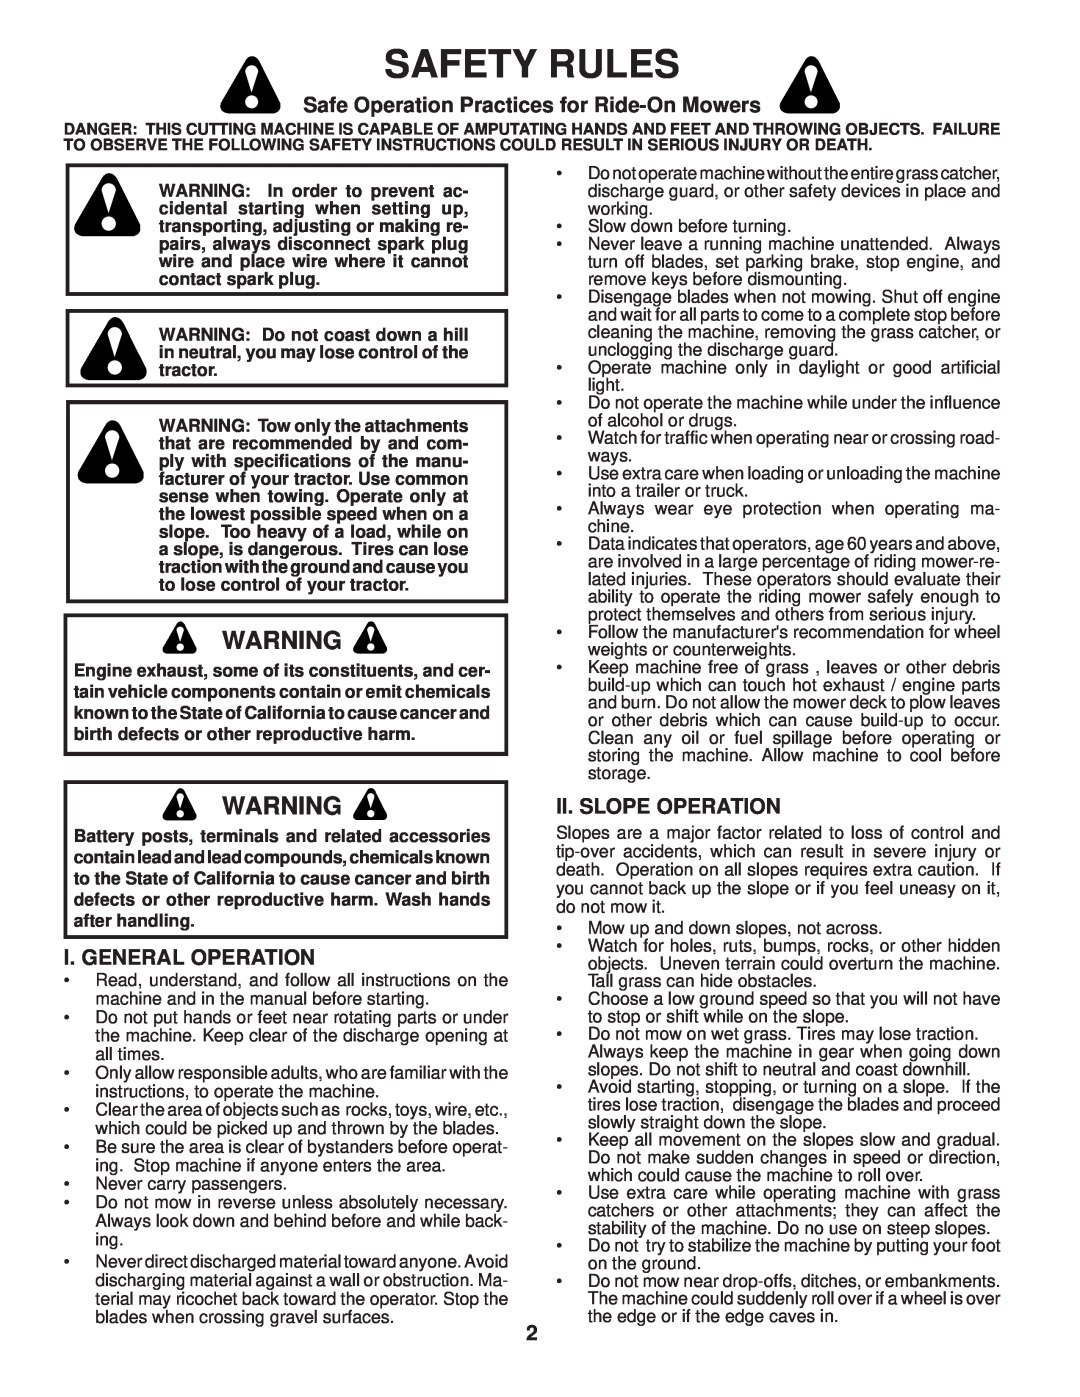 Poulan PB22TH42YT Safety Rules, Safe Operation Practices for Ride-On Mowers, I. General Operation, Ii. Slope Operation 